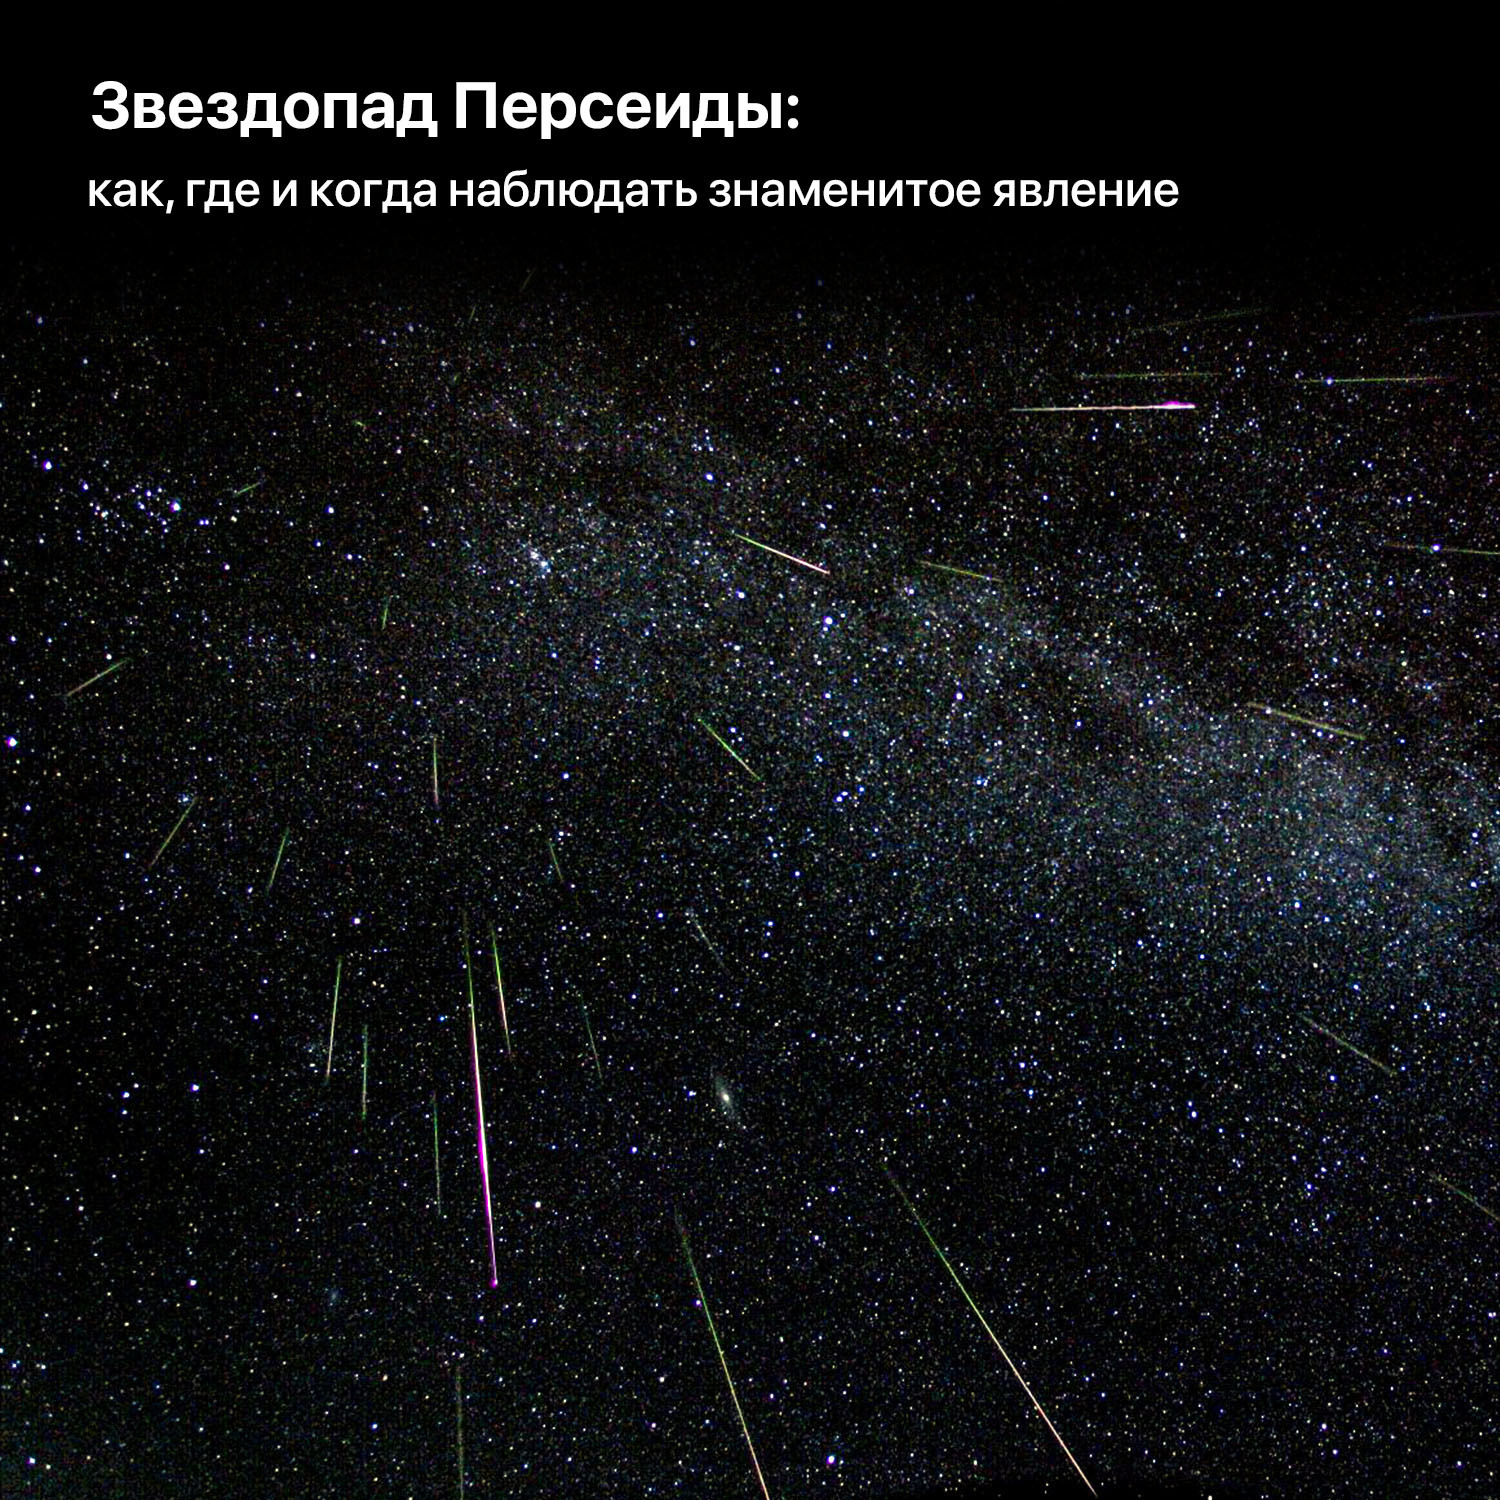 Perseid meteor shower: how, where and when to observe the famous phenomenon - Perseids, Space, Astronomy, Longpost